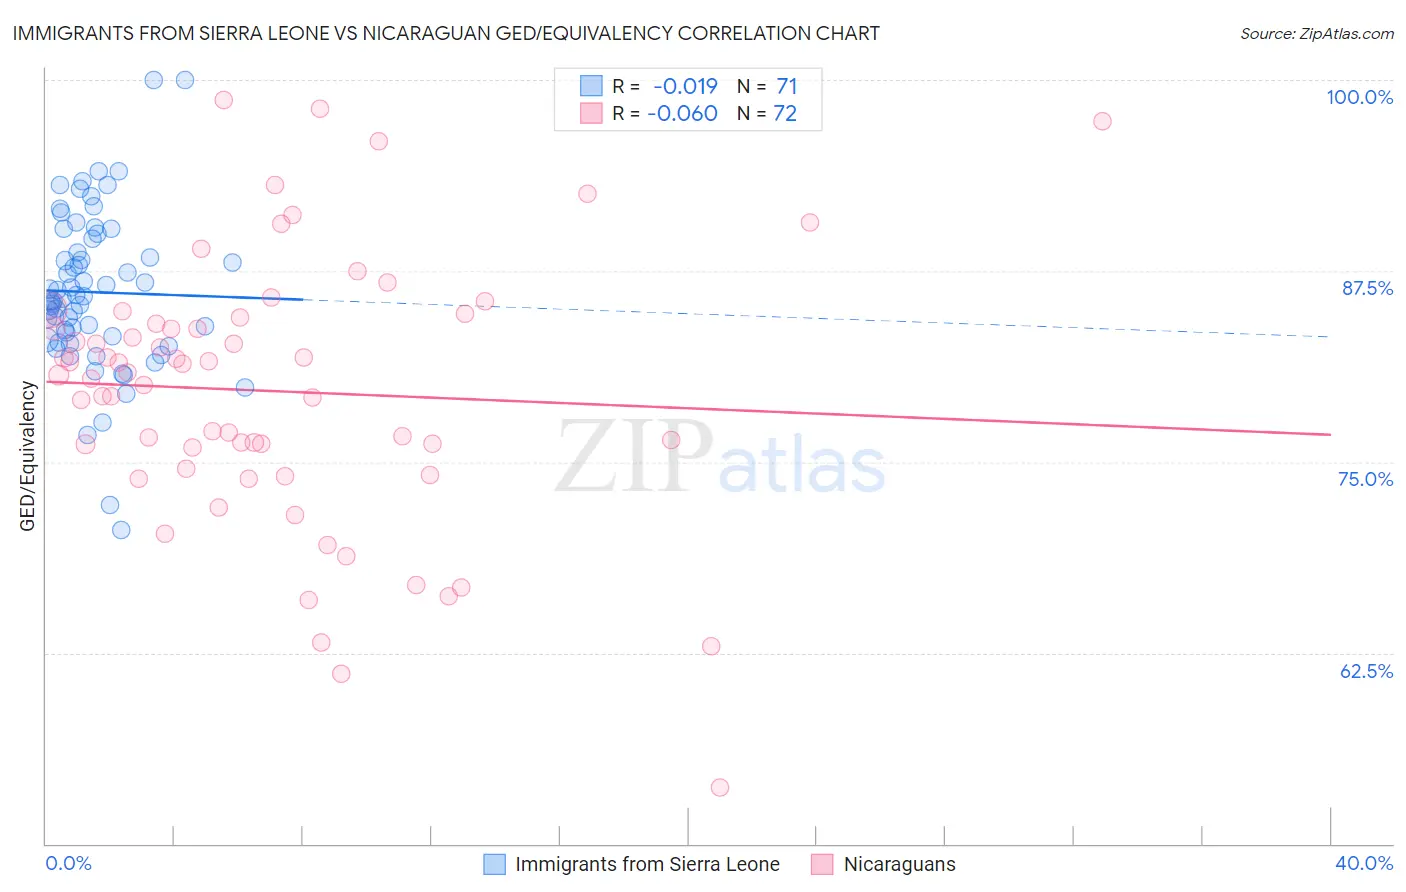 Immigrants from Sierra Leone vs Nicaraguan GED/Equivalency